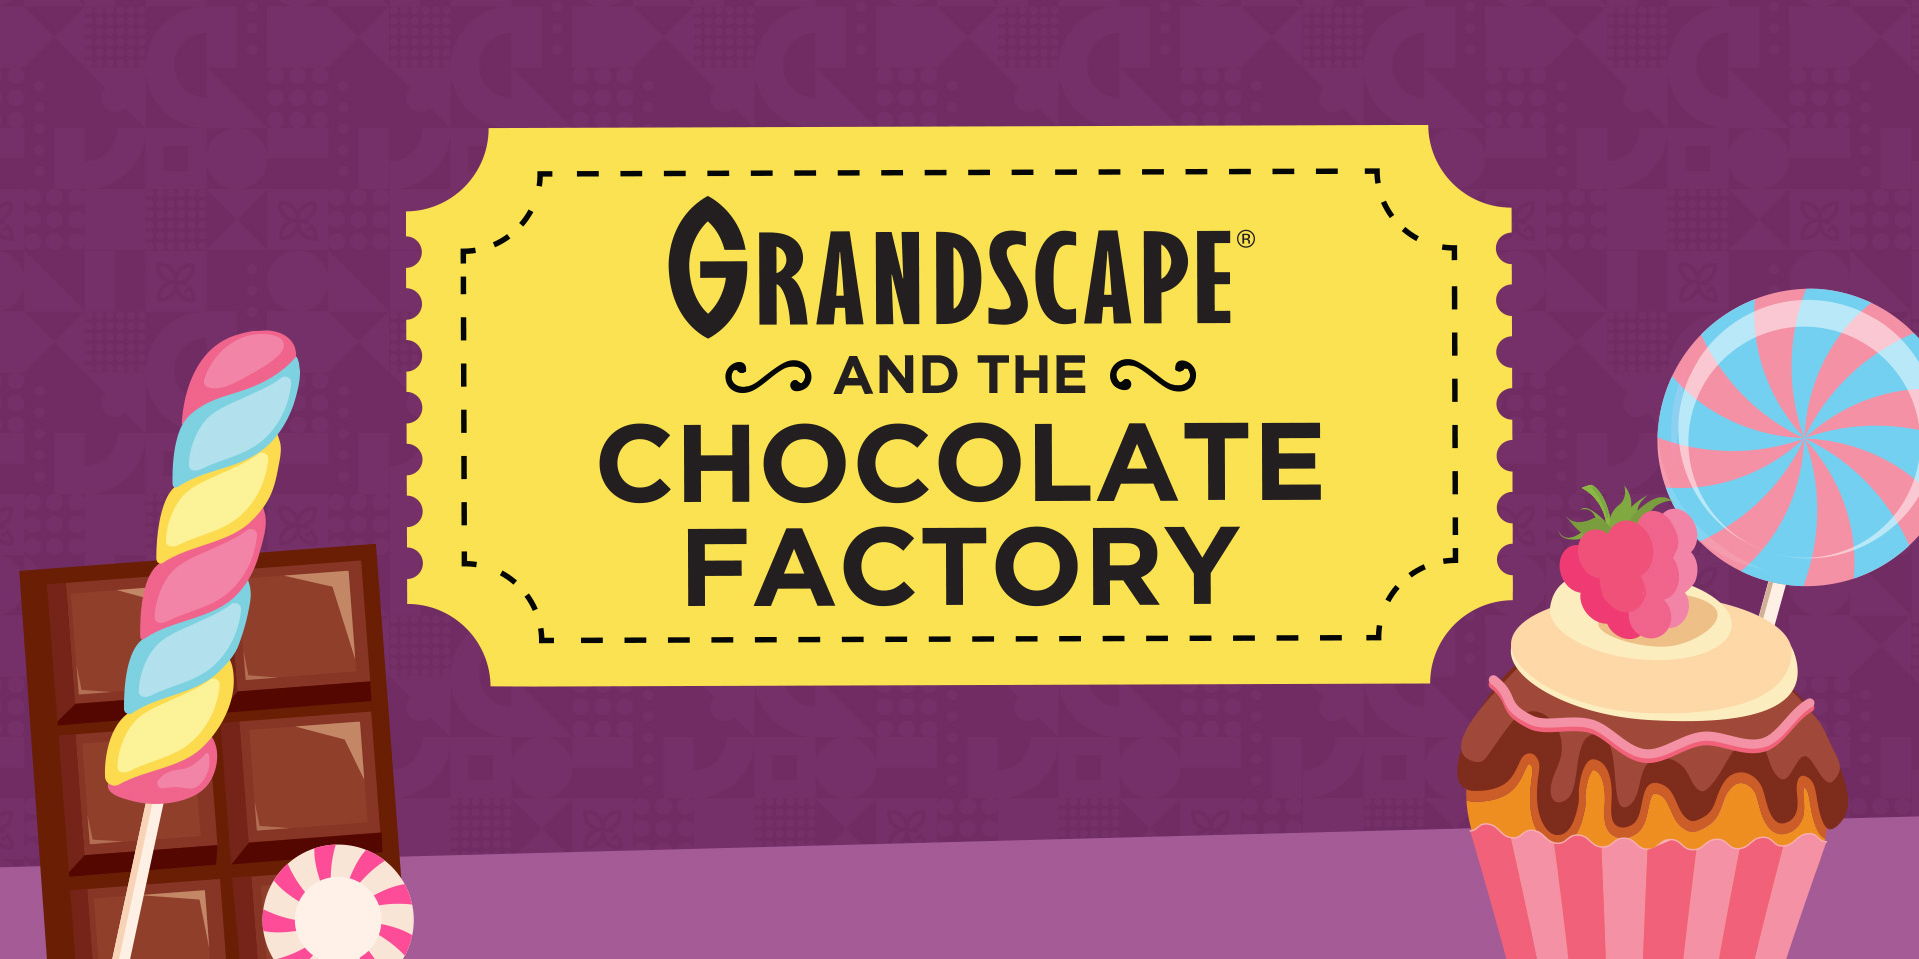 Grandscape and The Chocolate Factory promotional image